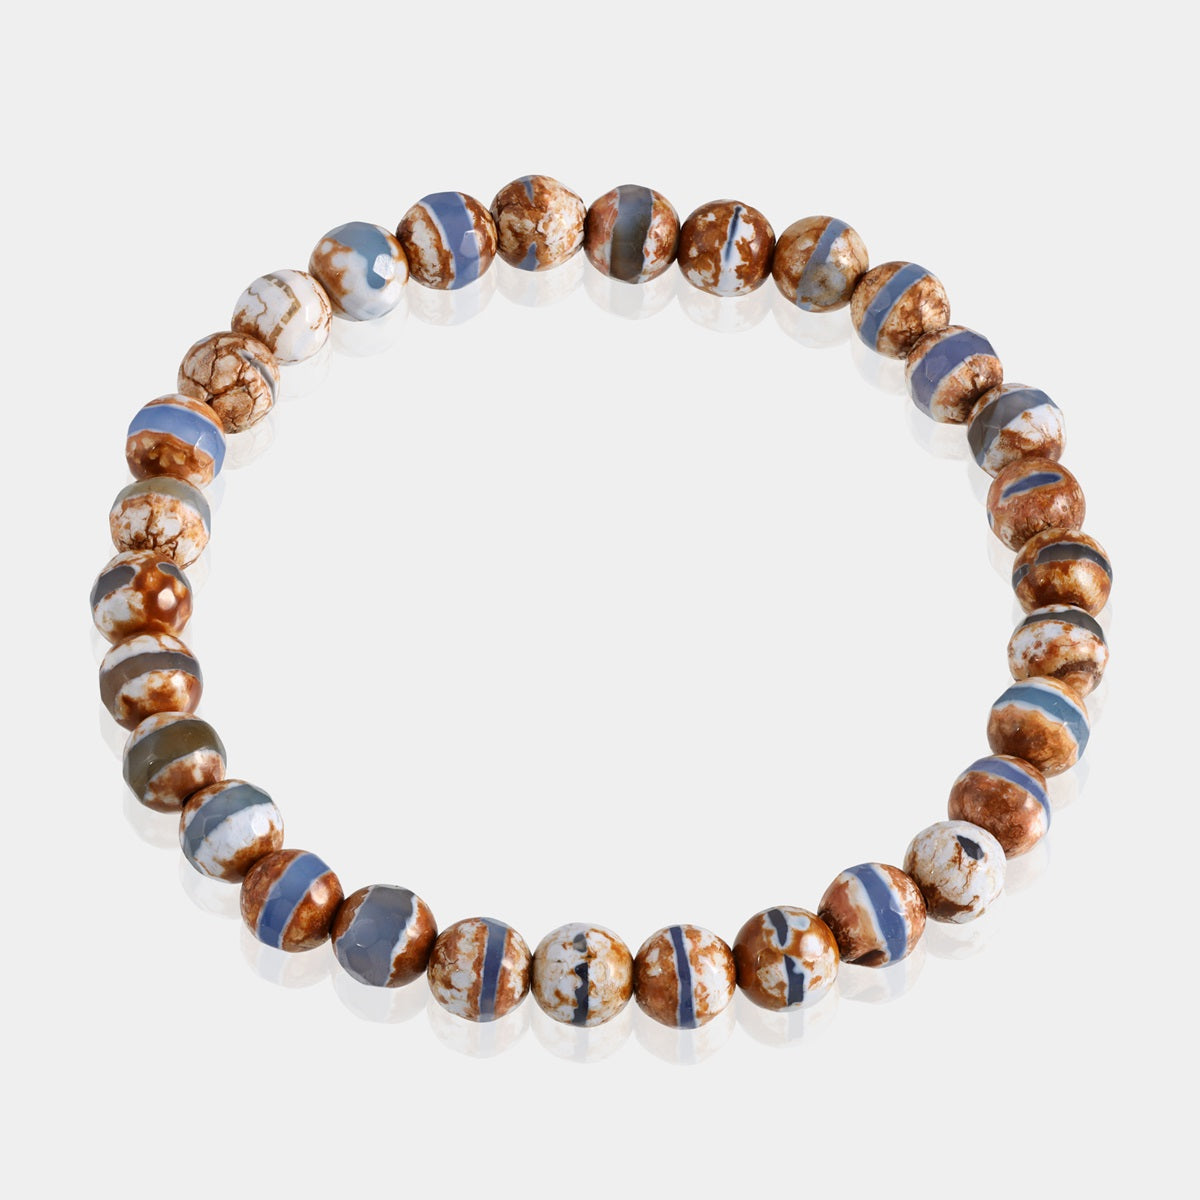 Side view of the Tibetan Agate Stretch Bracelet, showcasing its comfortable fit and the craftsmanship of the 6mm faceted round beads for a sophisticated look